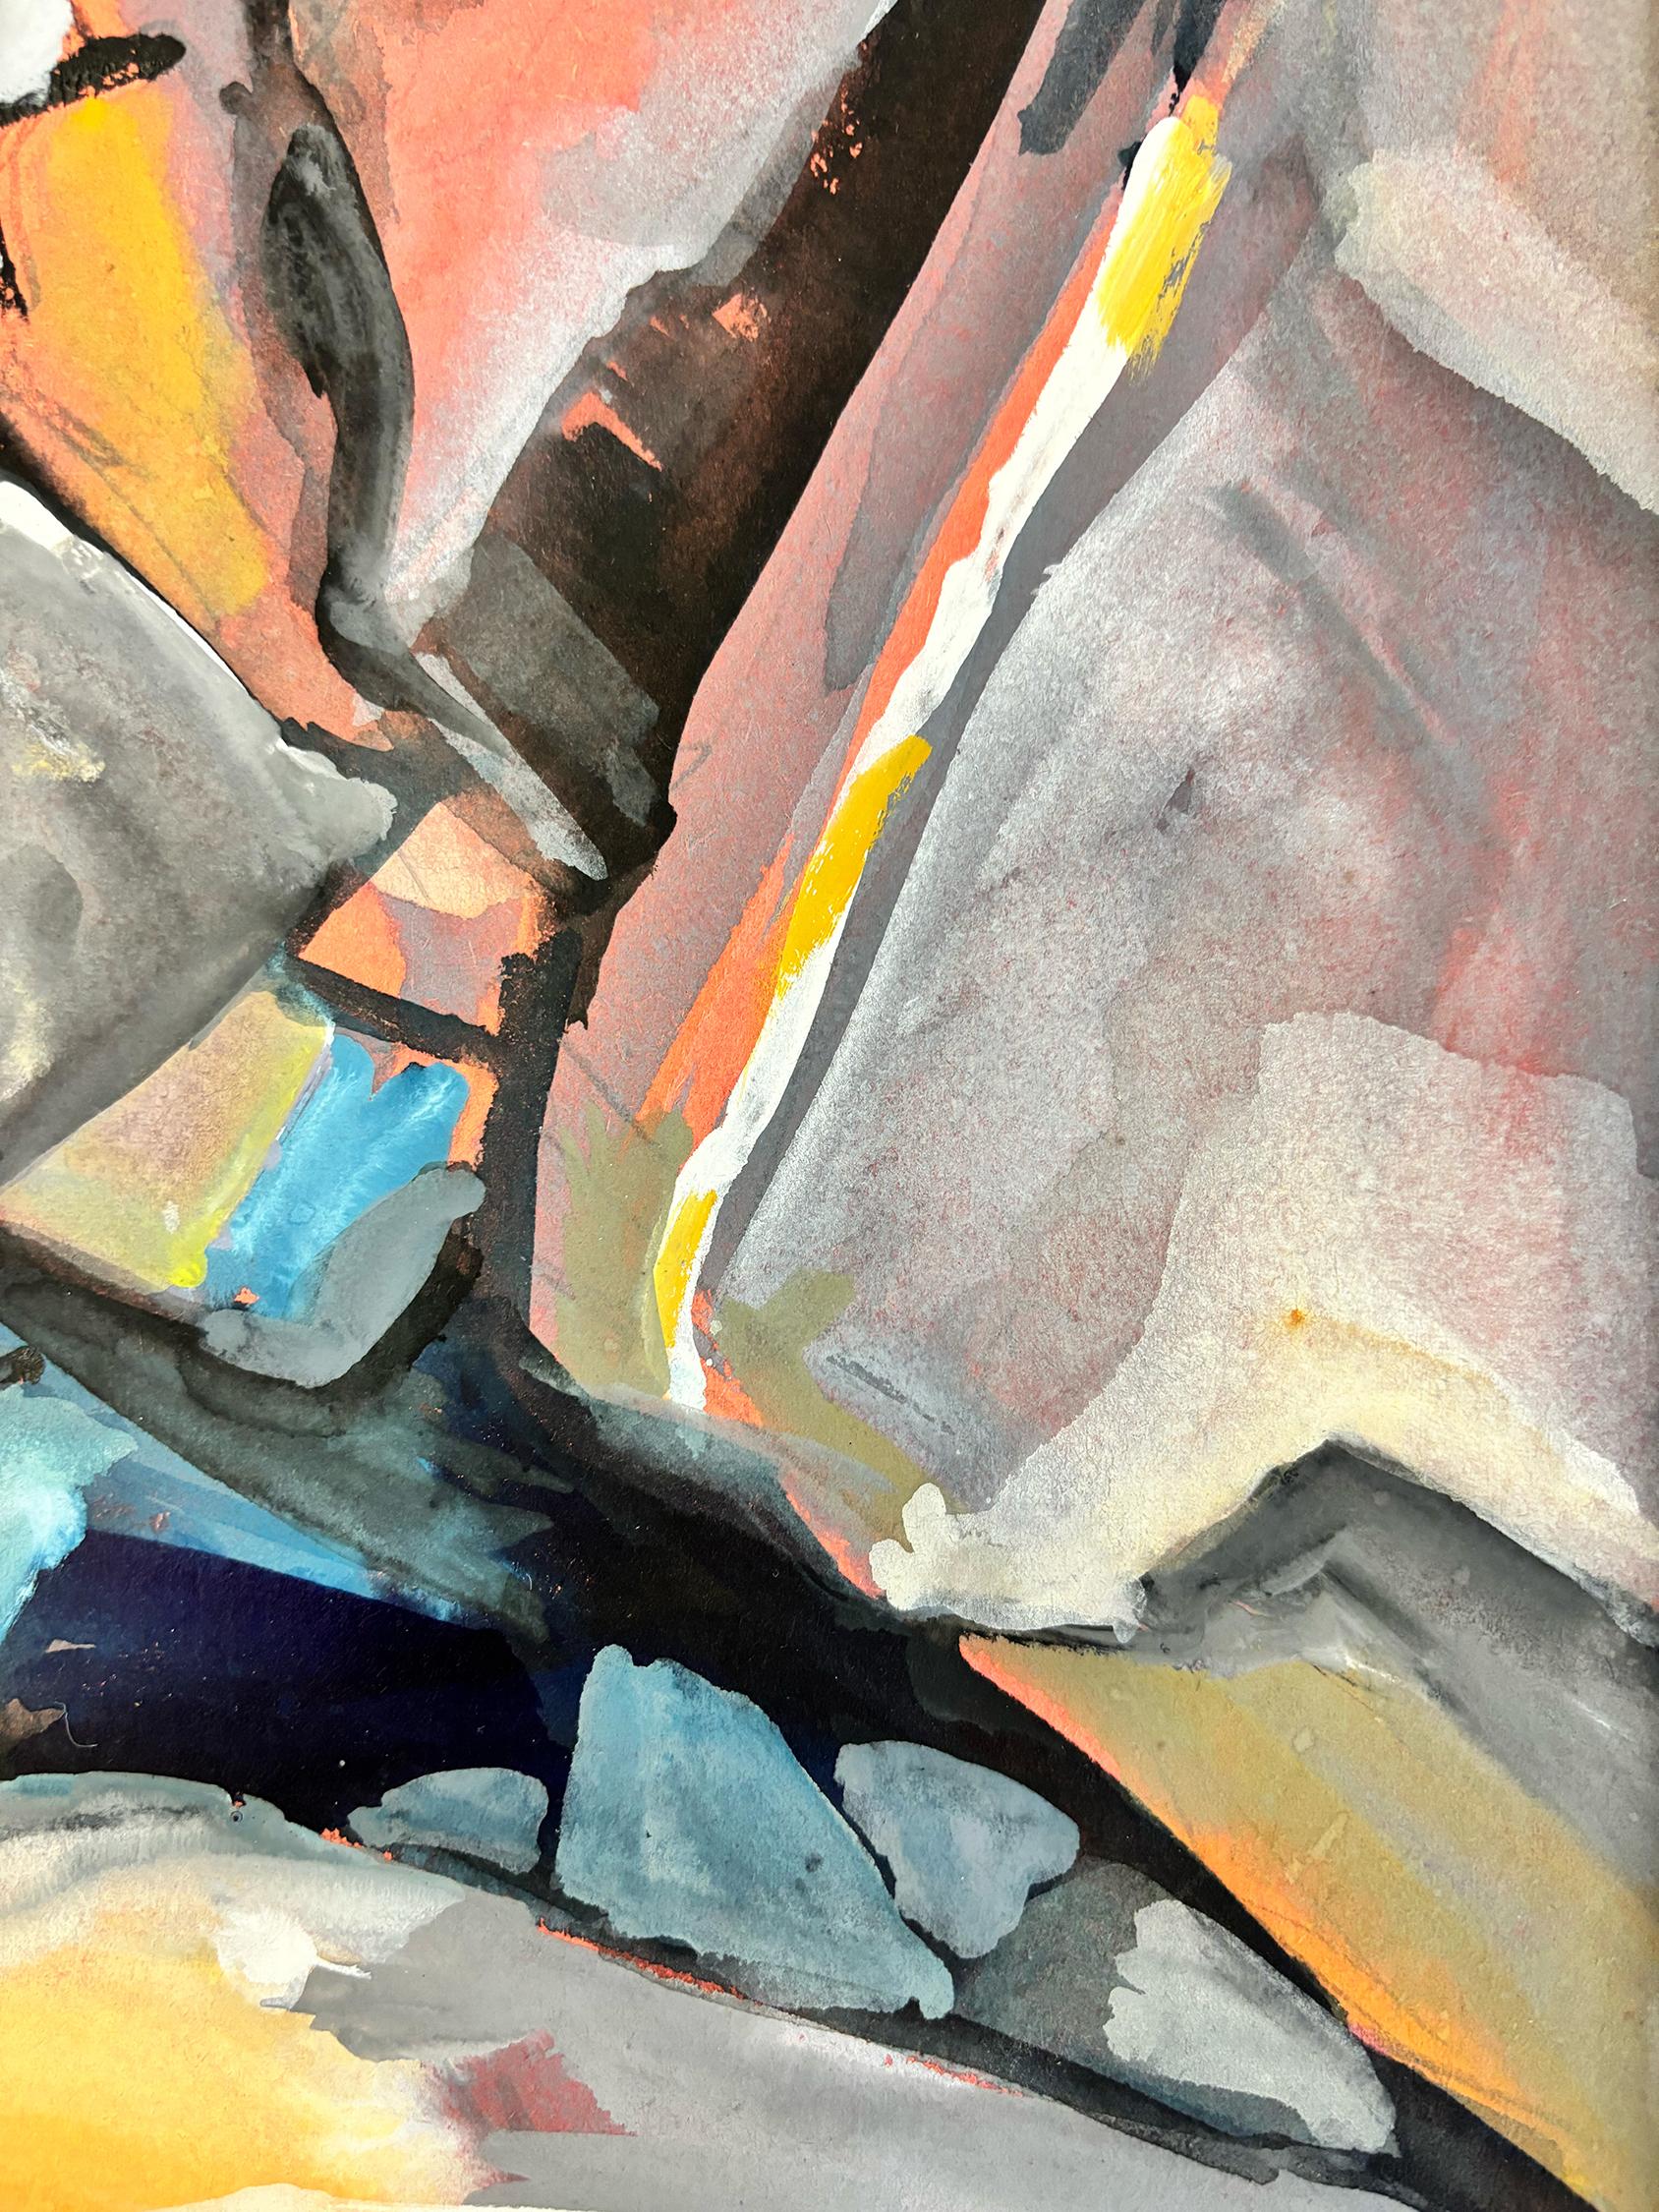 The genius of any work by Wein is in his interpretation.  This study of rocks, is an exercise in abstraction.  Of taking strong amorphous shapes and playing with color and form.  Wonderful to strengthen a room with strong color palette.  
This piece